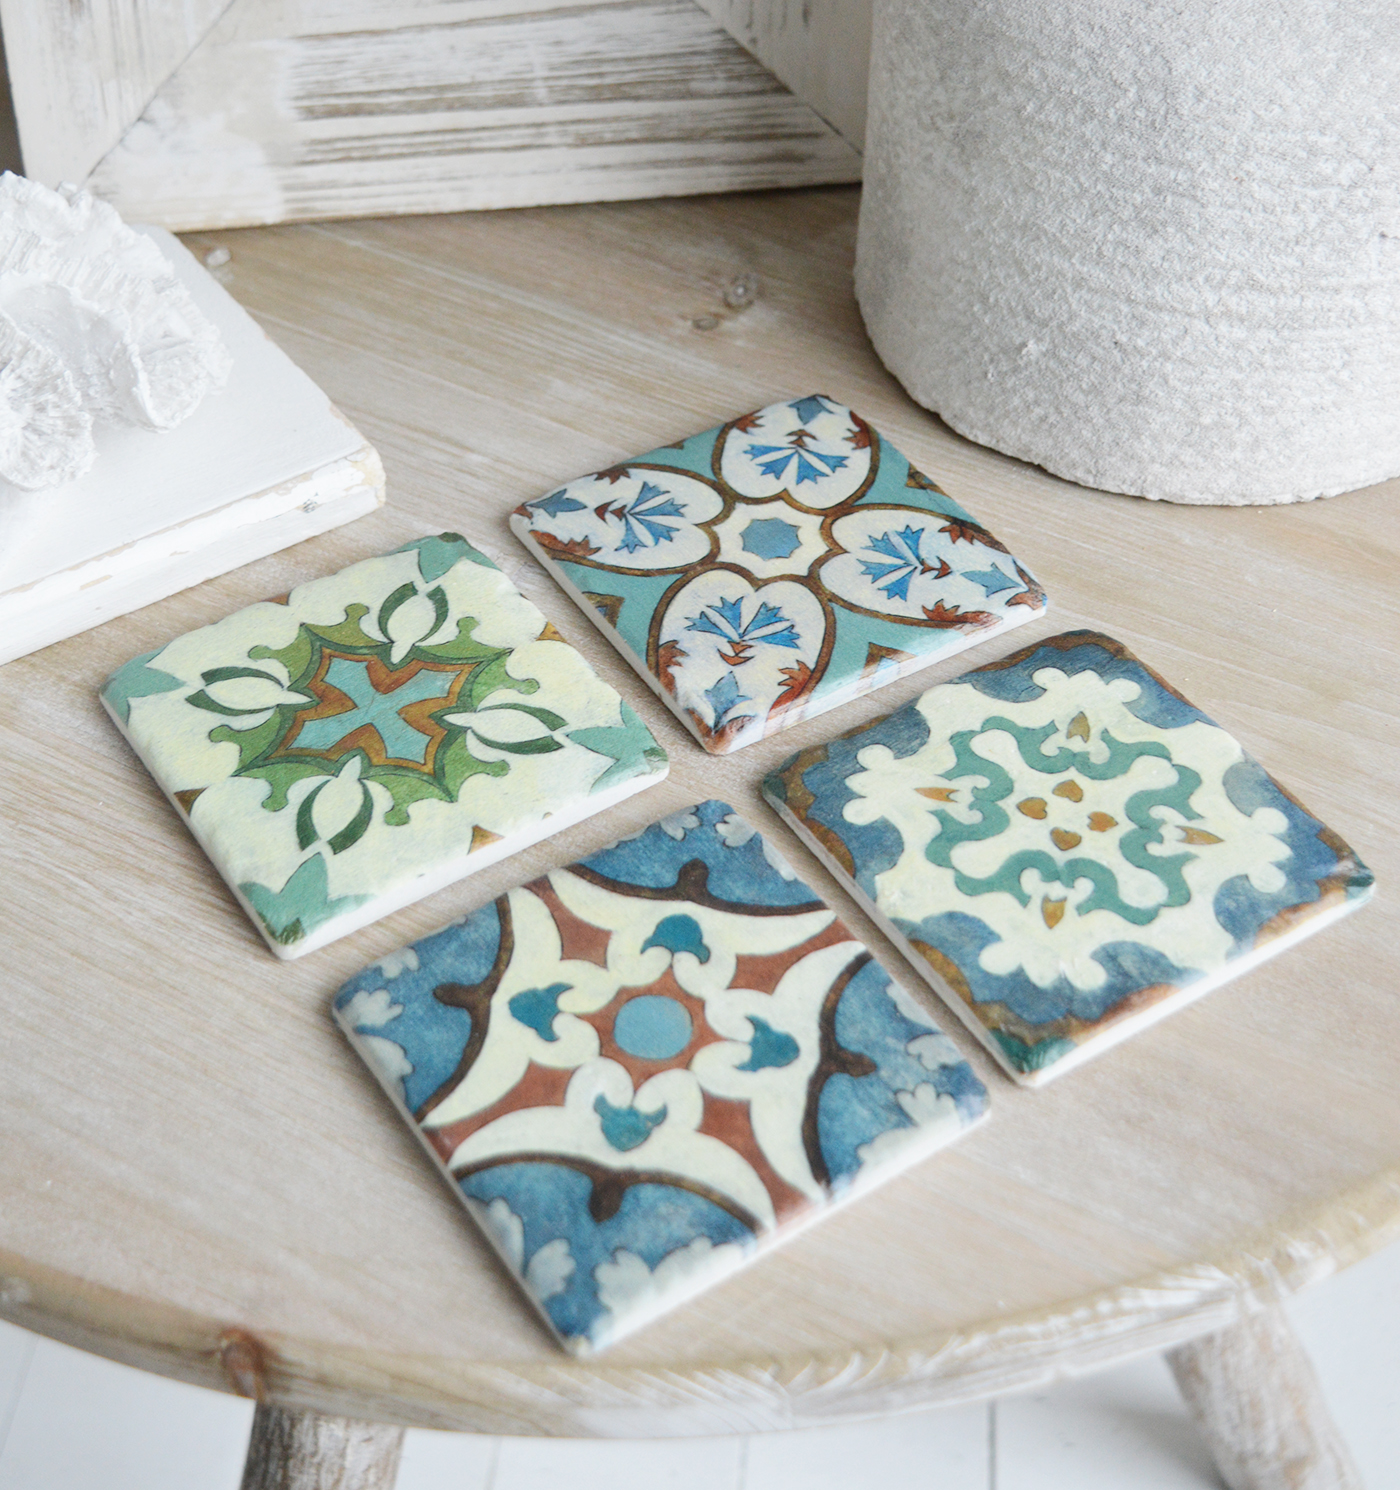 Period mosaic coaster tiles - Coasters to complement New England modern farmhouse, country and coastal furniture, home decor and interiors